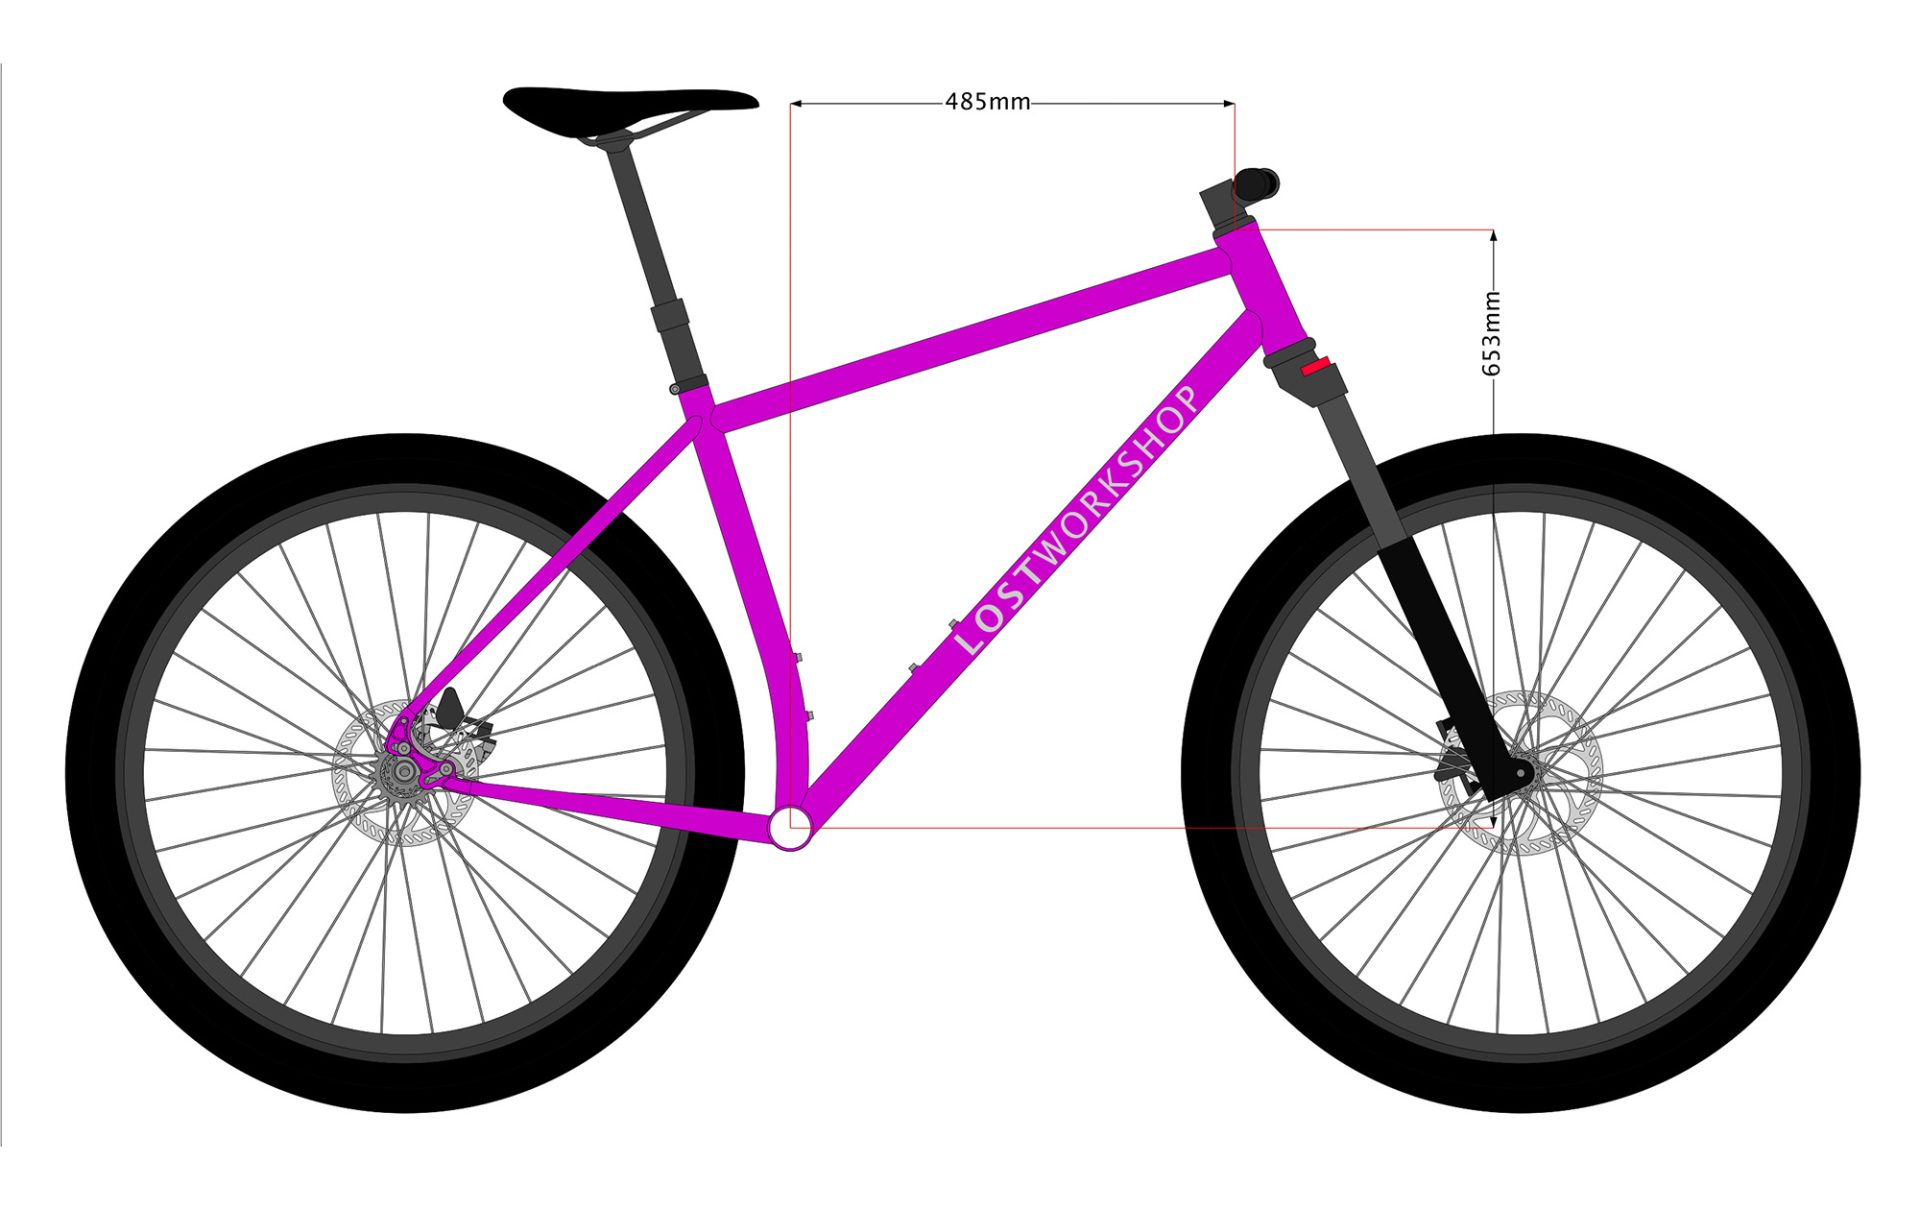 A schematic of a mountain bike (with pink frame) viewed from the side to show the stack and reach meeasurements.